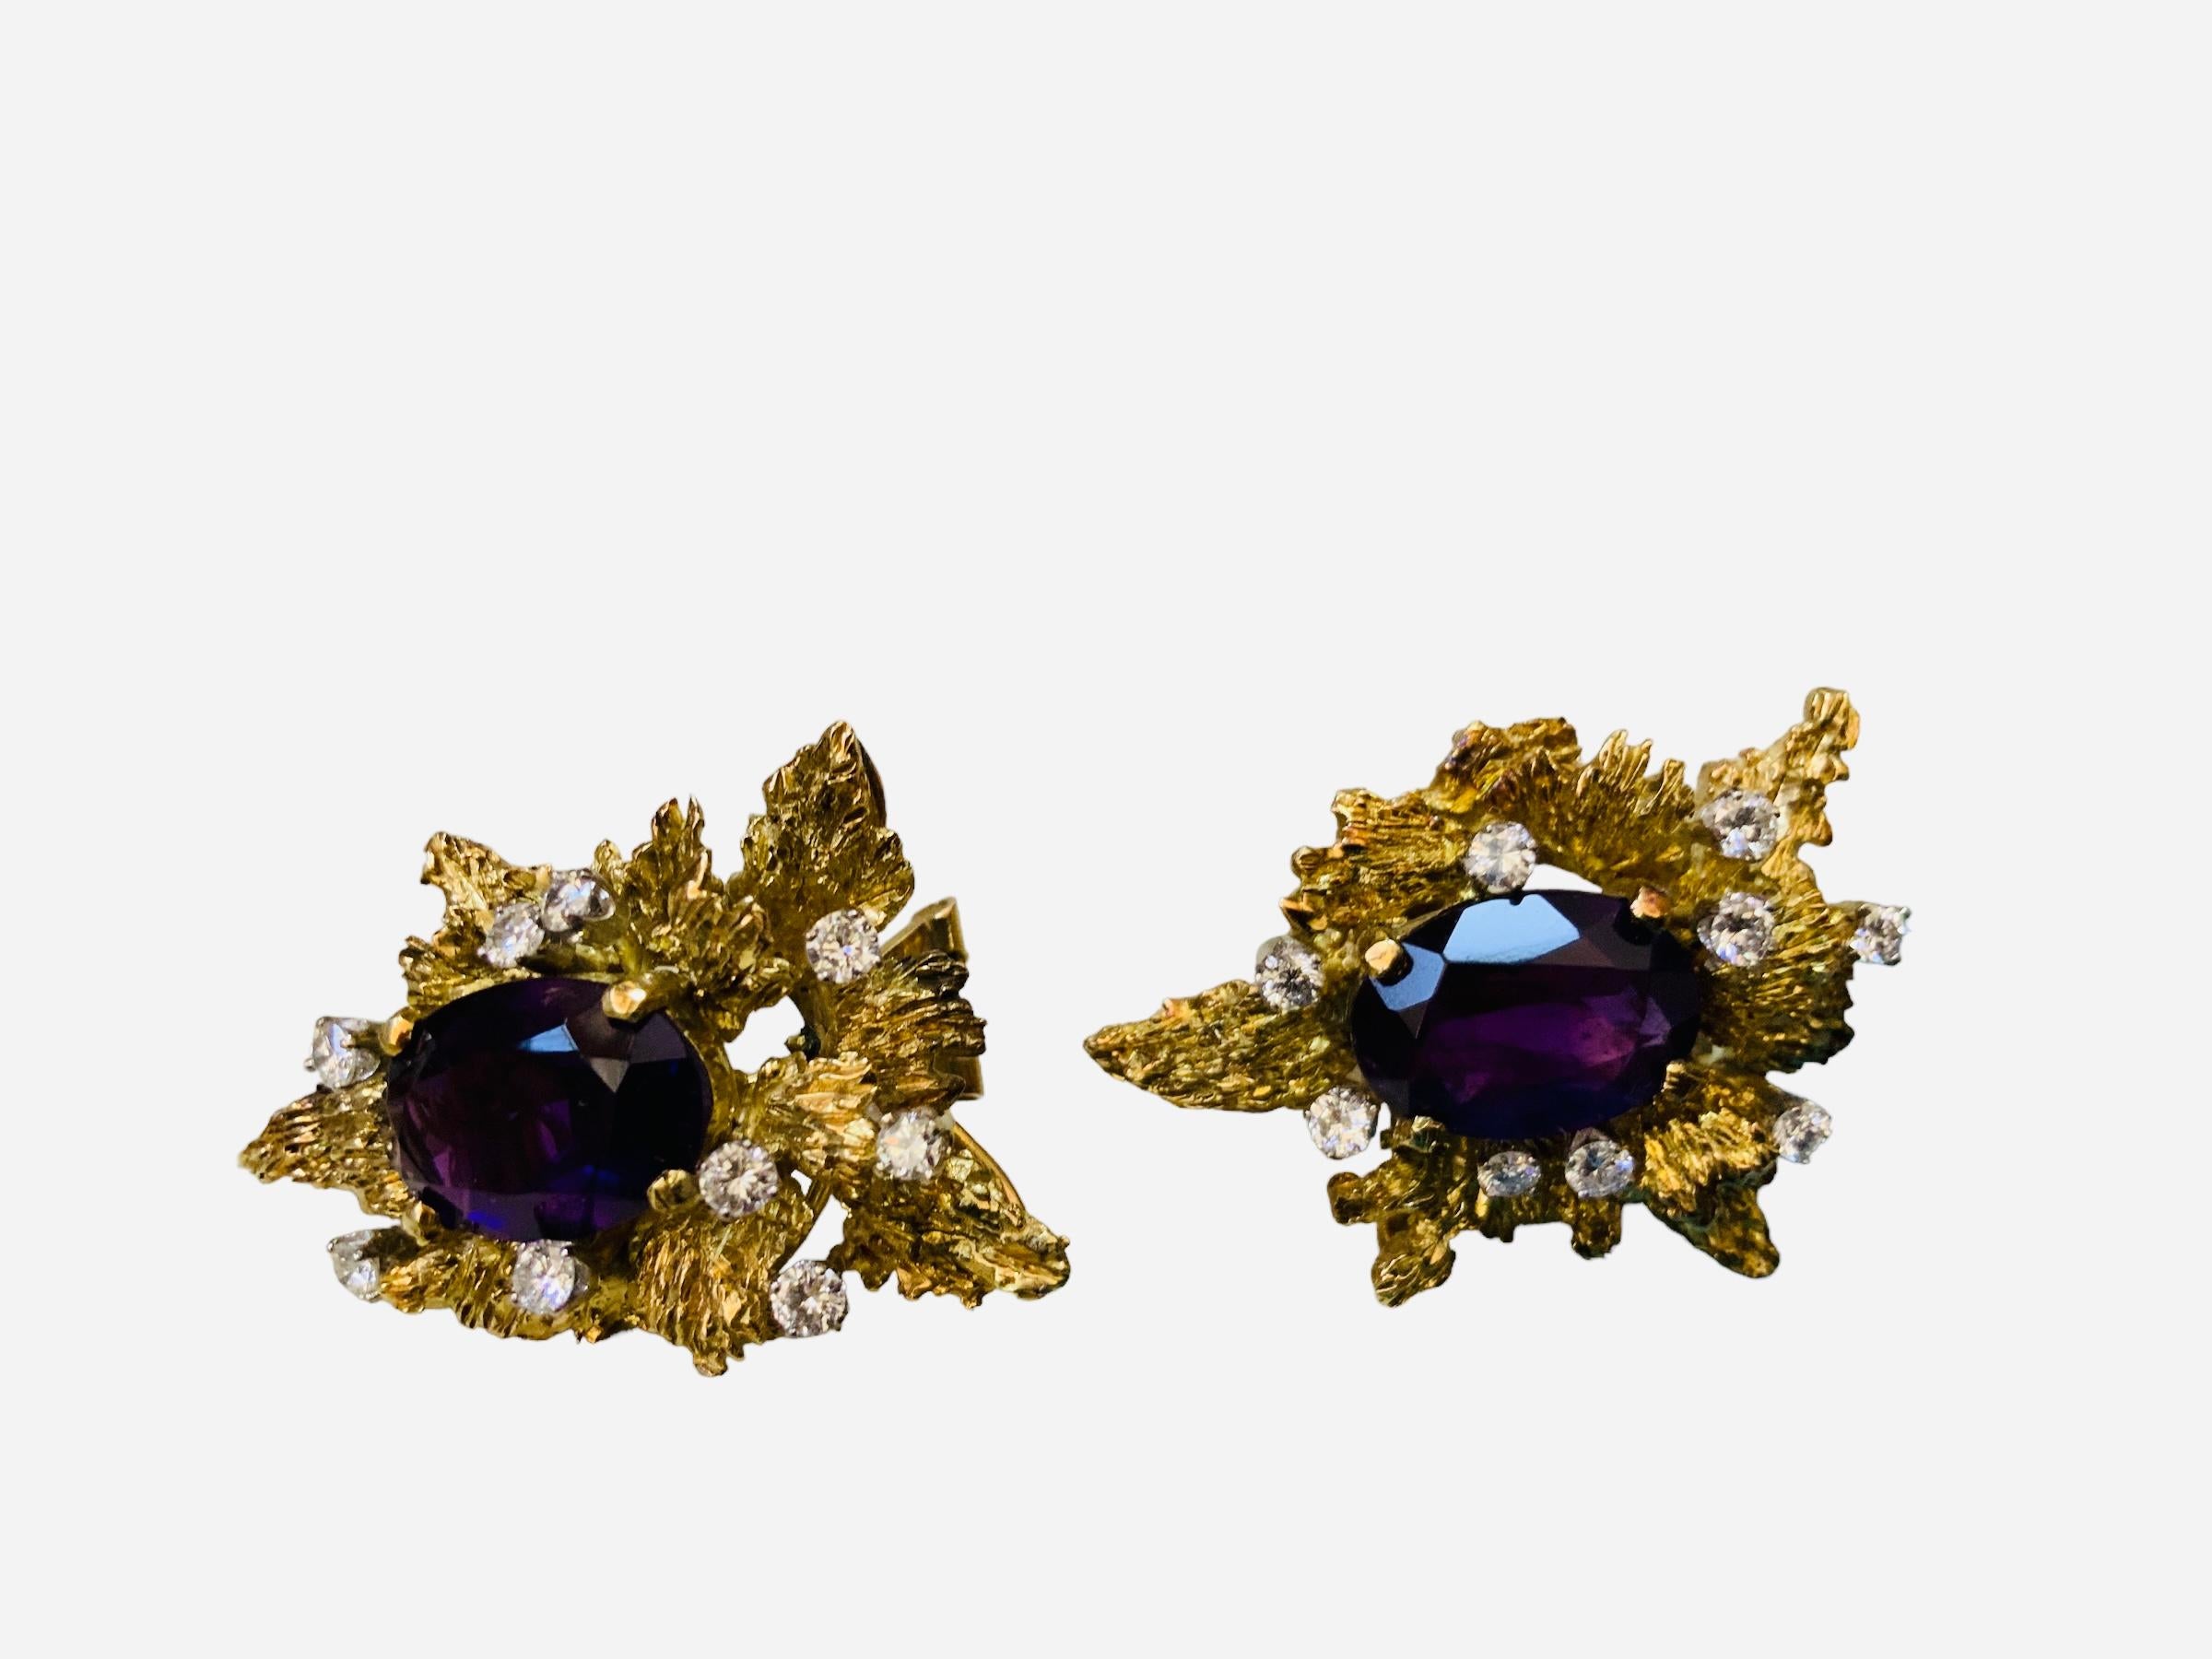 Brutalist Style Pair Of 14K Gold Amethyst And Diamonds Earrings  For Sale 4